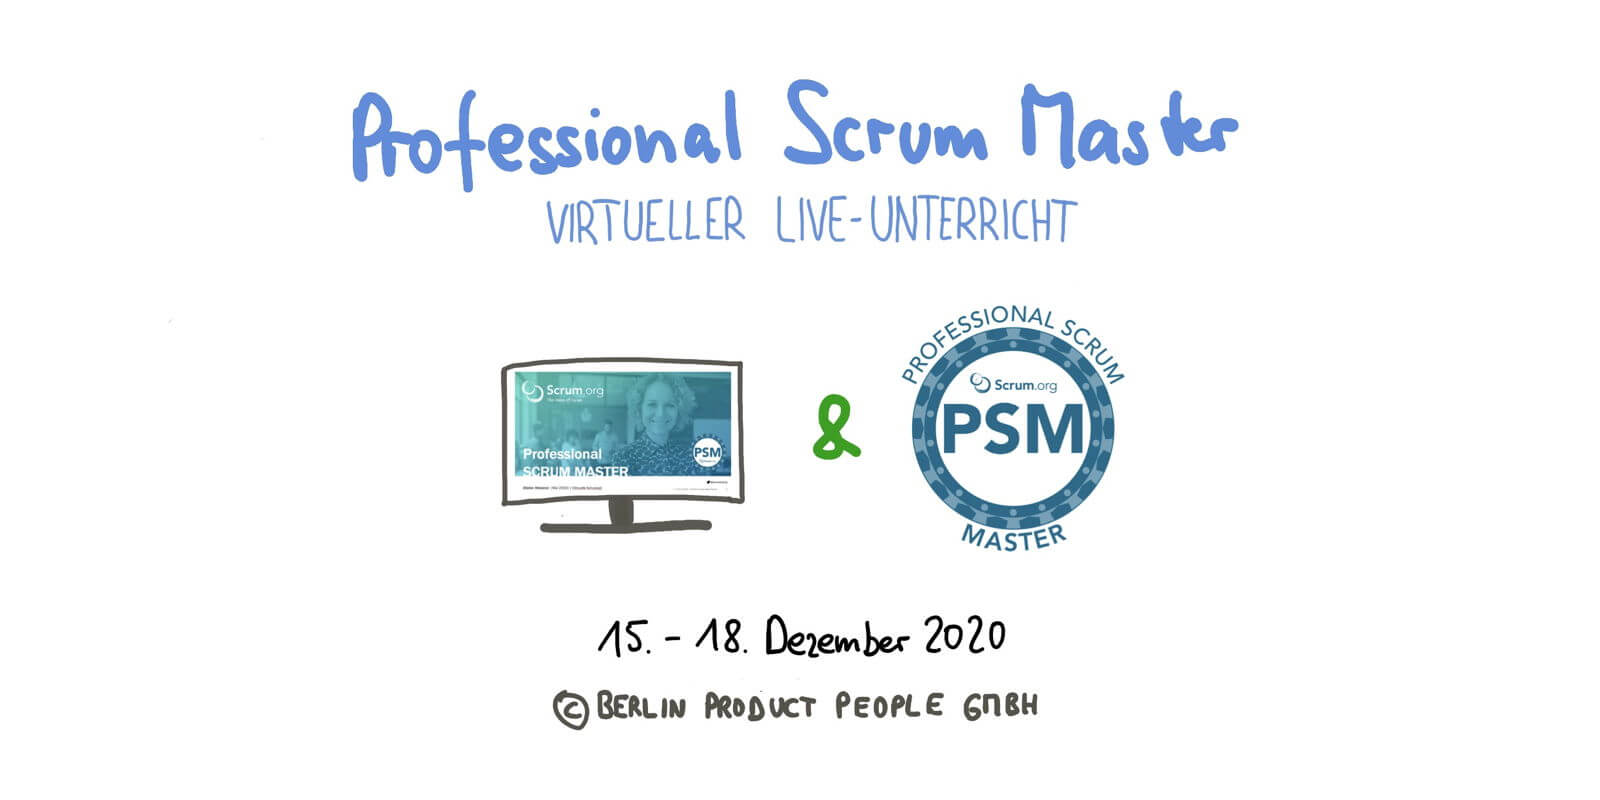 🖥 Professional Scrum Master Training w/ PSM I certificate — Online: December 15-18, 2020 — Berlin Product People GmbH